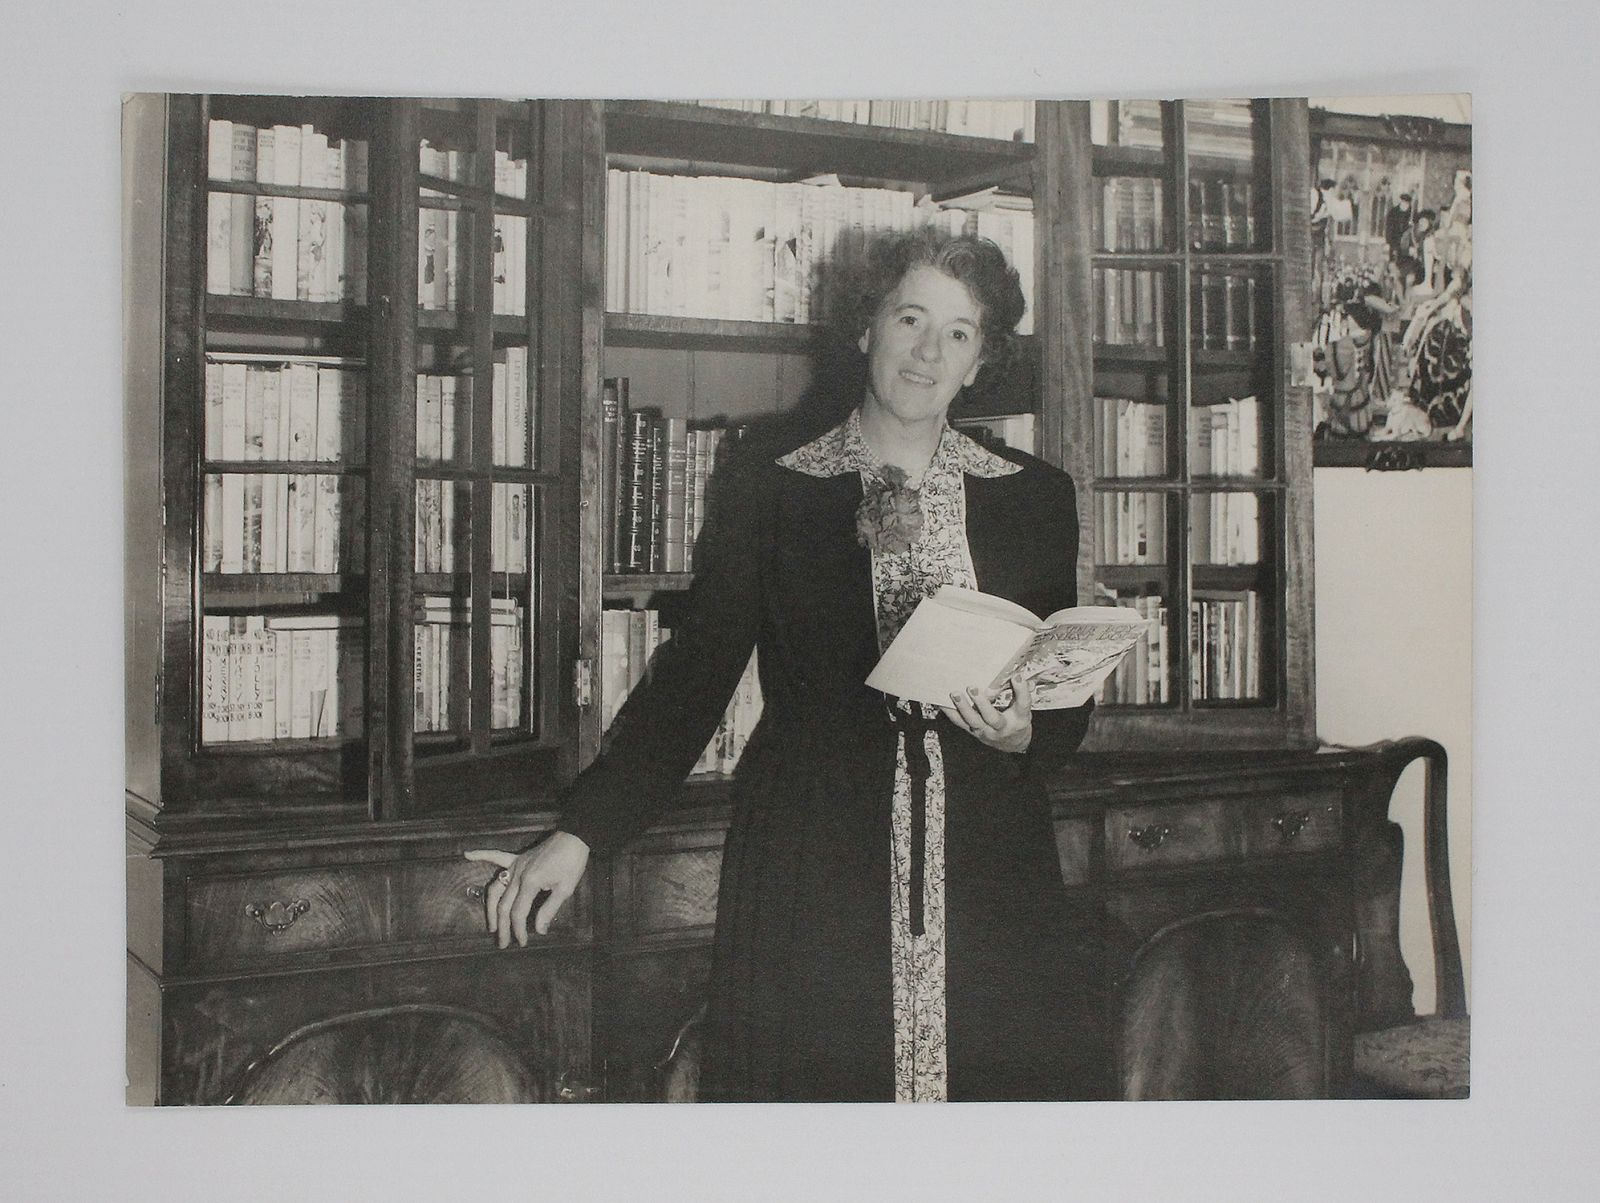 SIGNED ORIGINAL PHOTOGRAPH OF ENID BLYTON STANDING IN FRONT OF THE BOOKS SHE HAS WRITTEN -  image 1